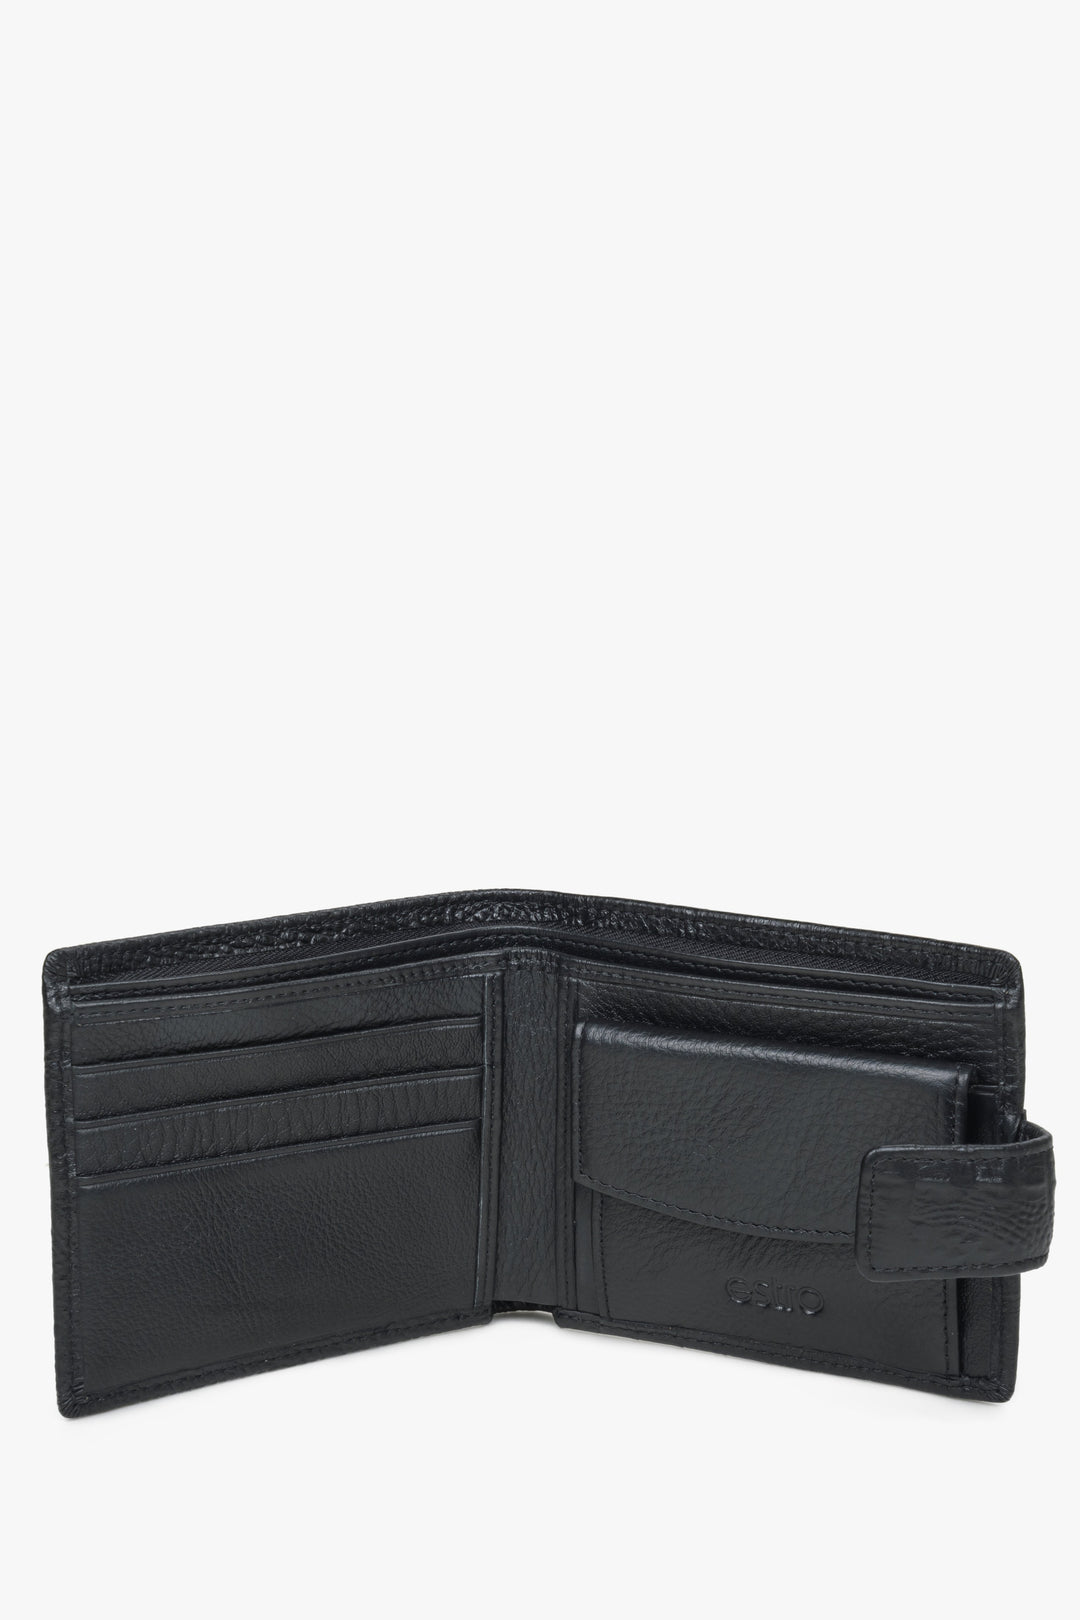 Men's black wallet with a clasp made of embossed genuine leather by Estro - interior.